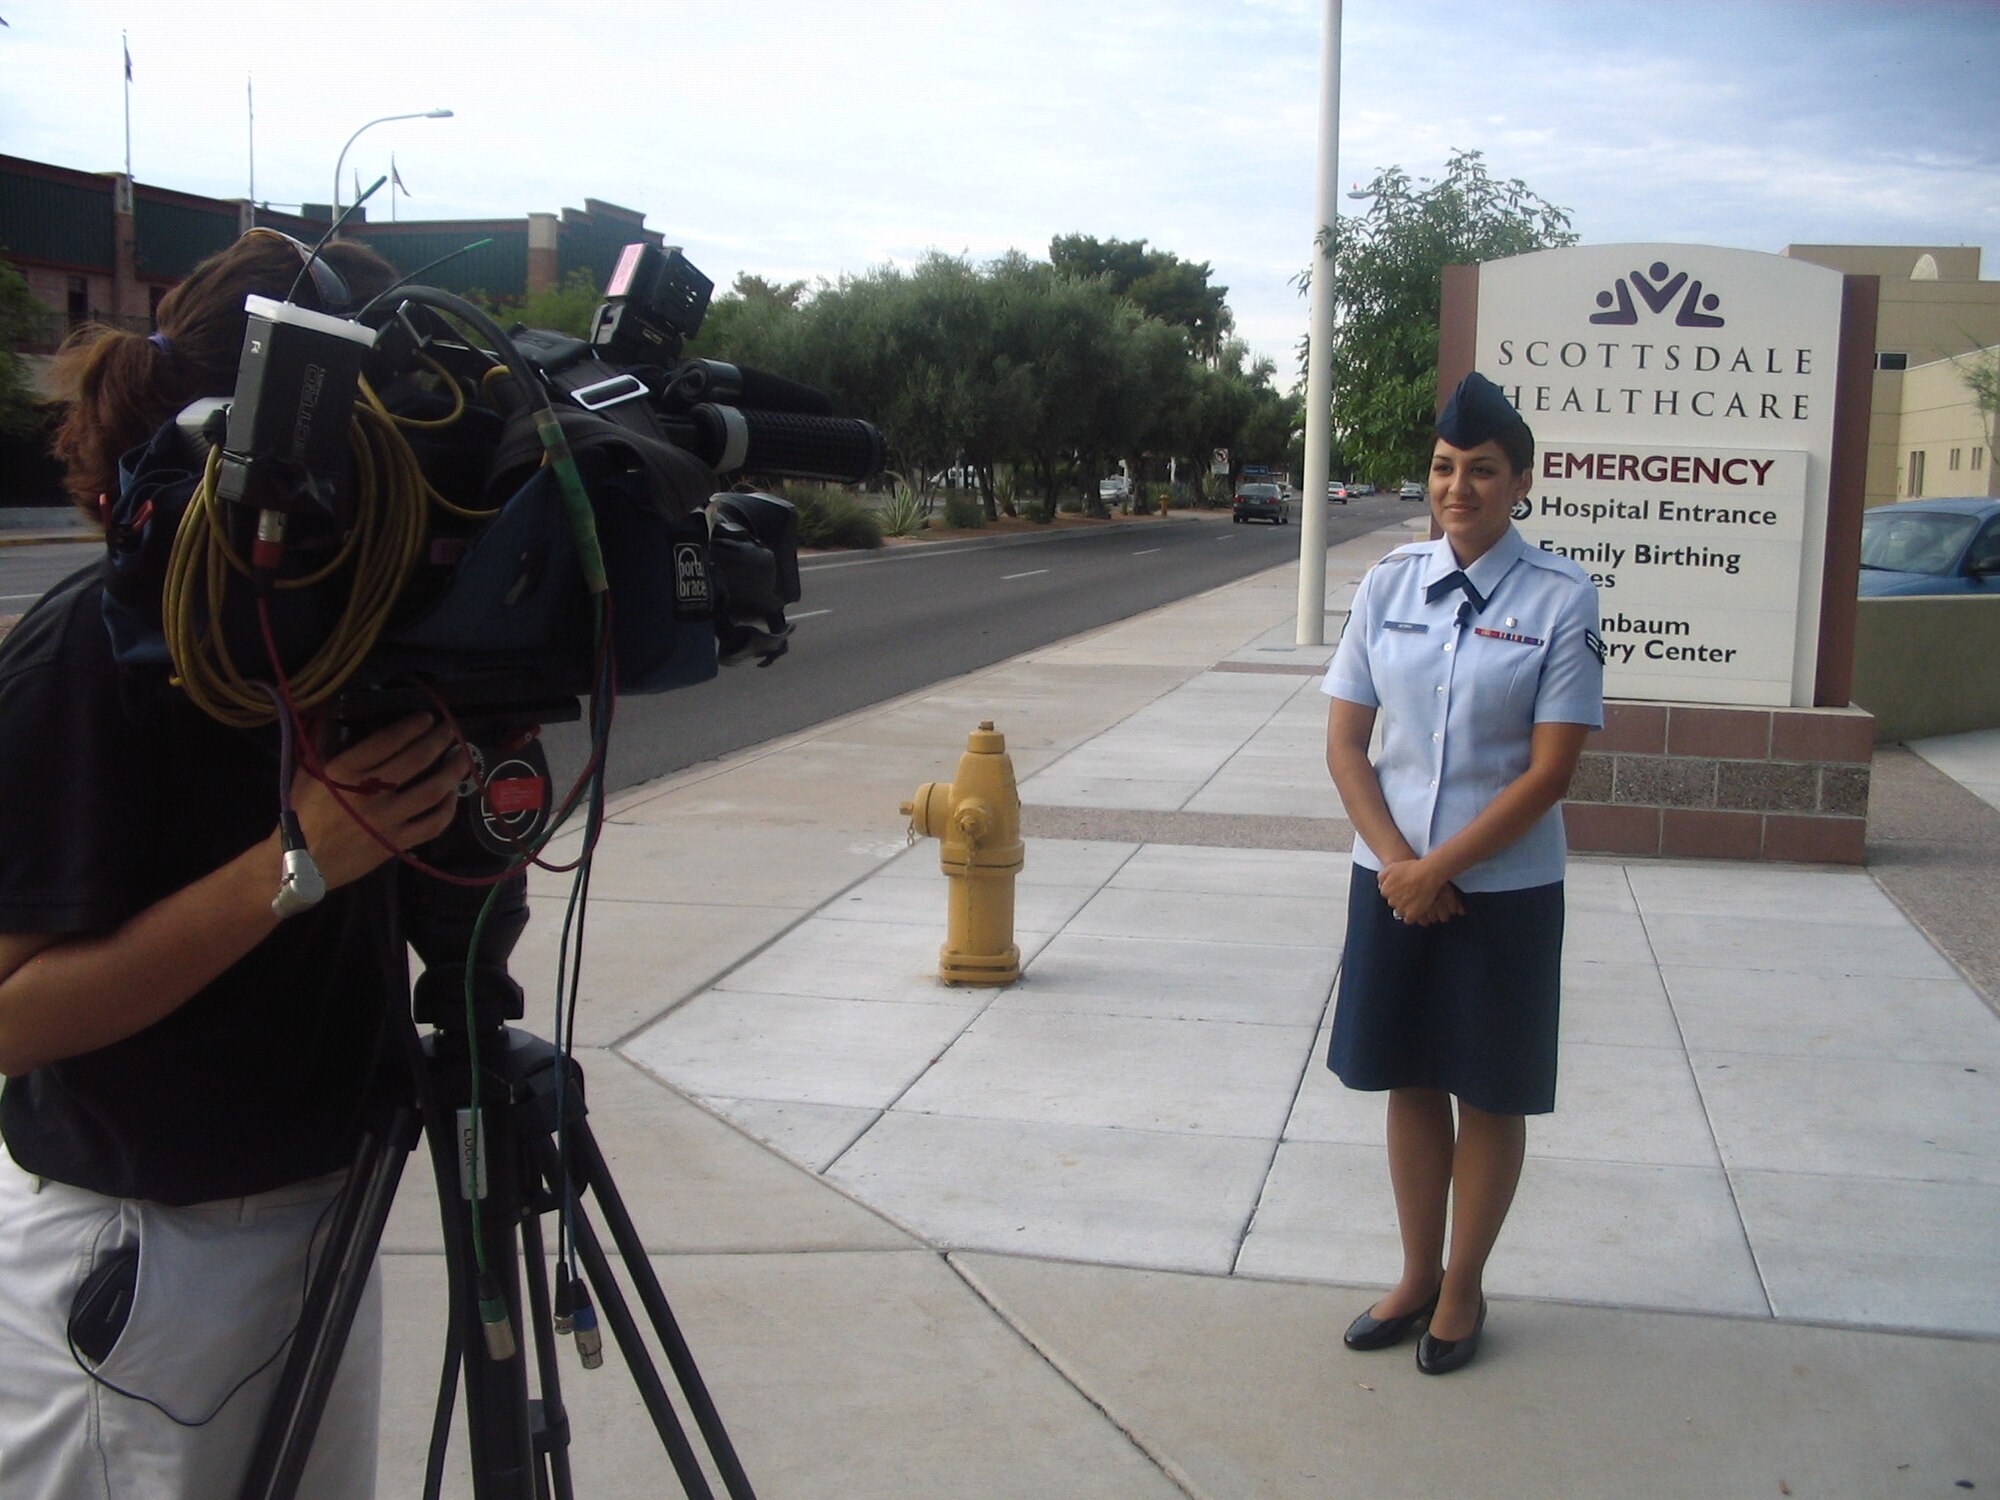 Airman 1st Class Heather Serra, 56th Medical Operations Squadron Aerospace Medicine technician is interviewed by KPNX 12 NBC Monday about the Readiness Skills Sustainment Training which she has undergone with Scottsdale Healthcare. The partnering program is to assist members of the 56th MDG and Scottsdale Healthcare in sustaining medical trauma training and provides military medical personnel with inpatient and wartime skills prior to deployments. (U.S. Air Force photo by Tech. Sgt. Janet Haliburton)